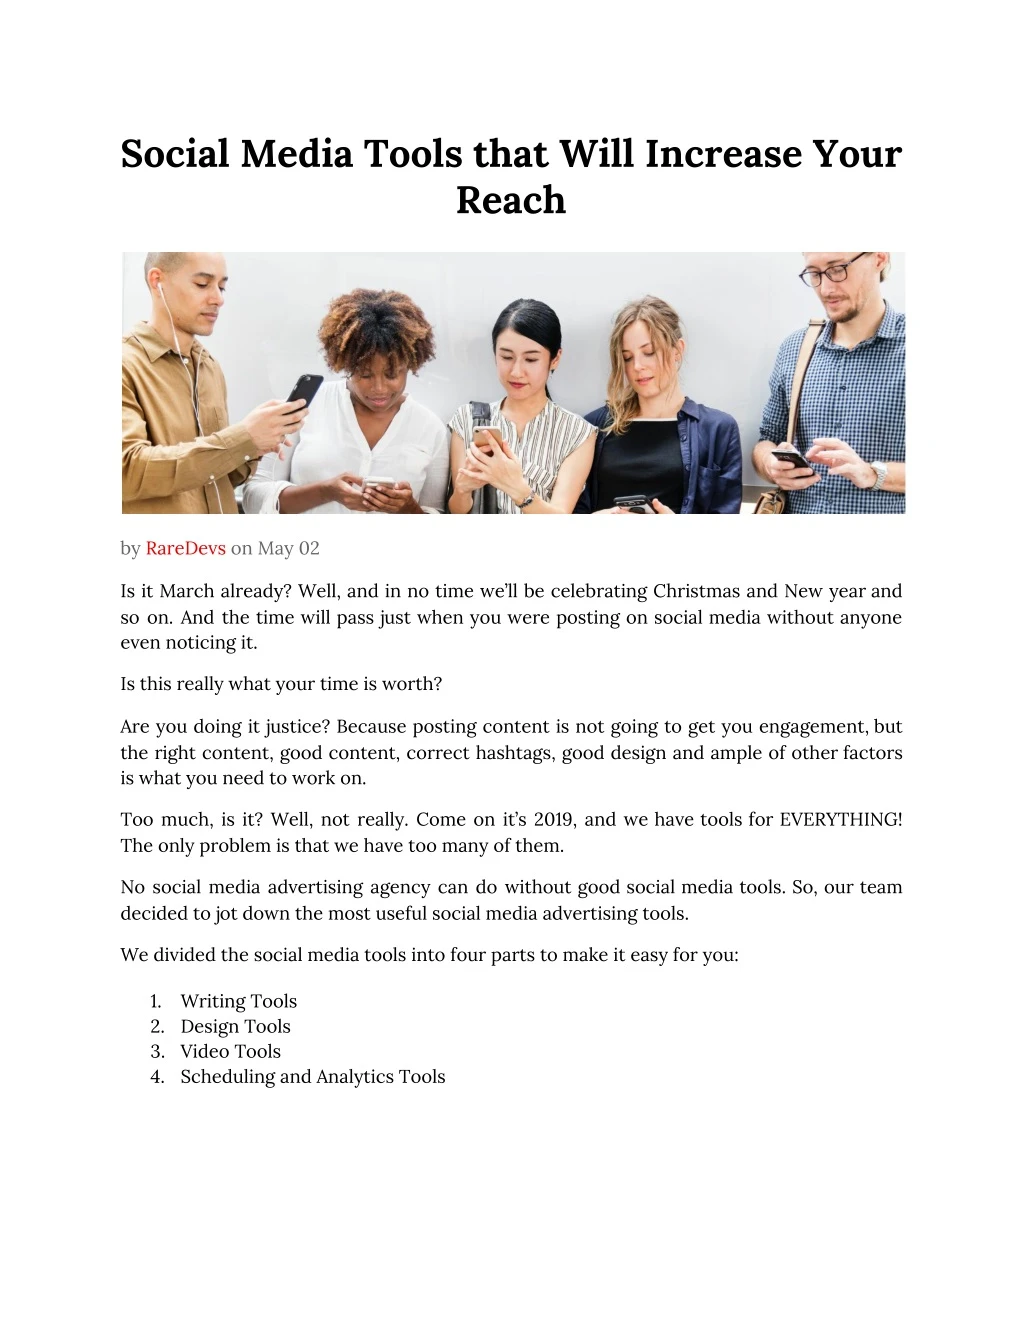 social media tools that will increase your reach